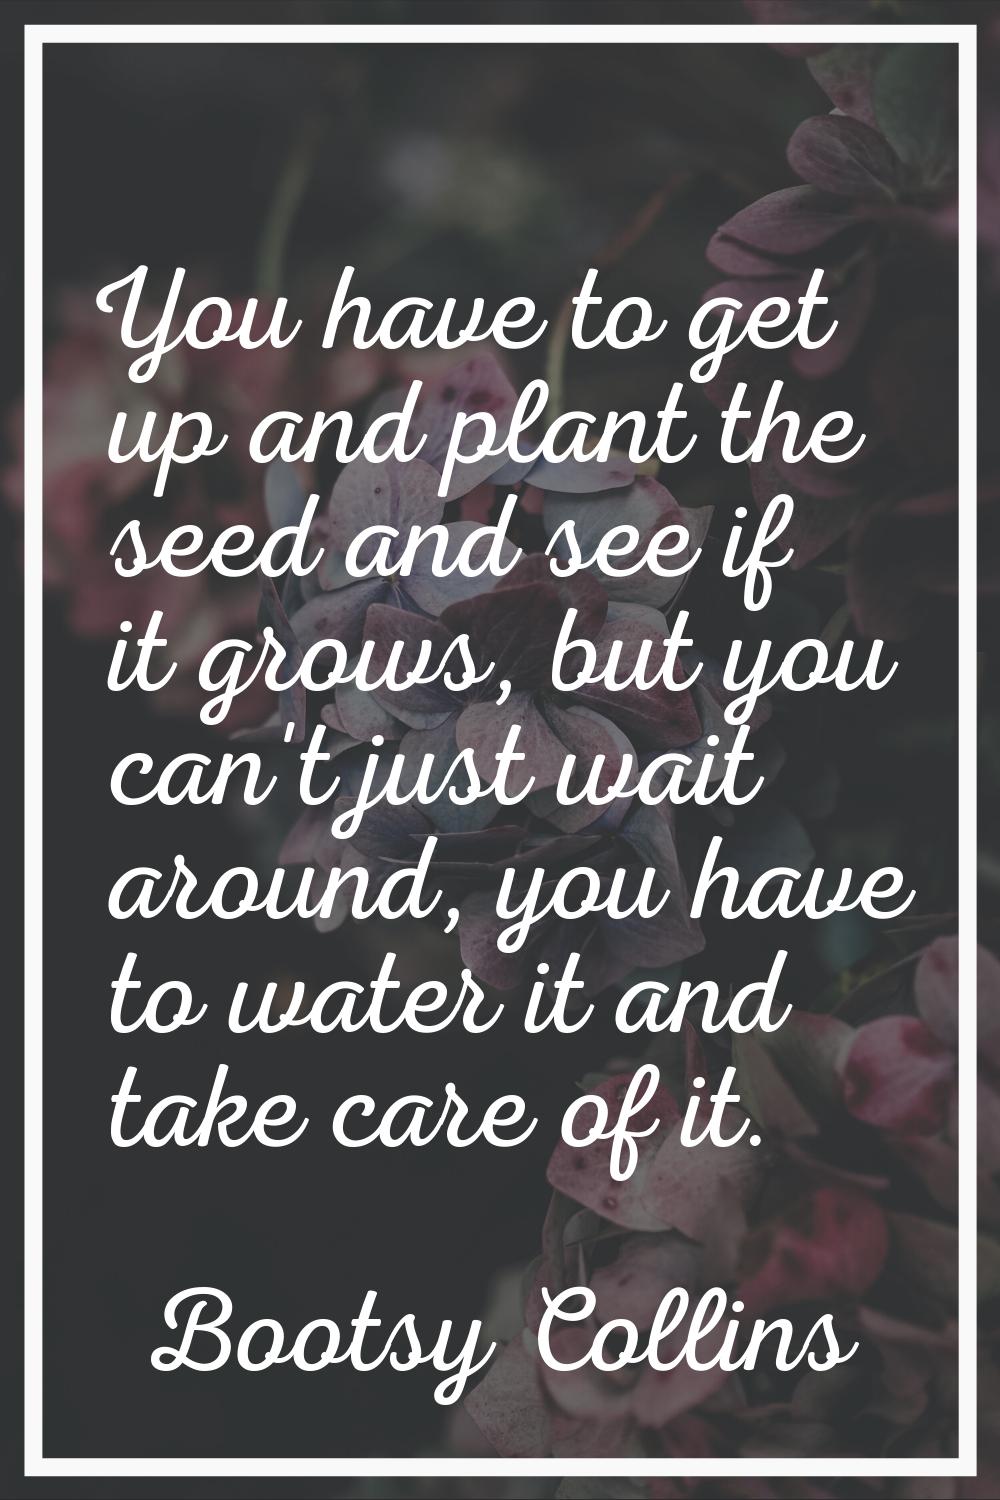 You have to get up and plant the seed and see if it grows, but you can't just wait around, you have